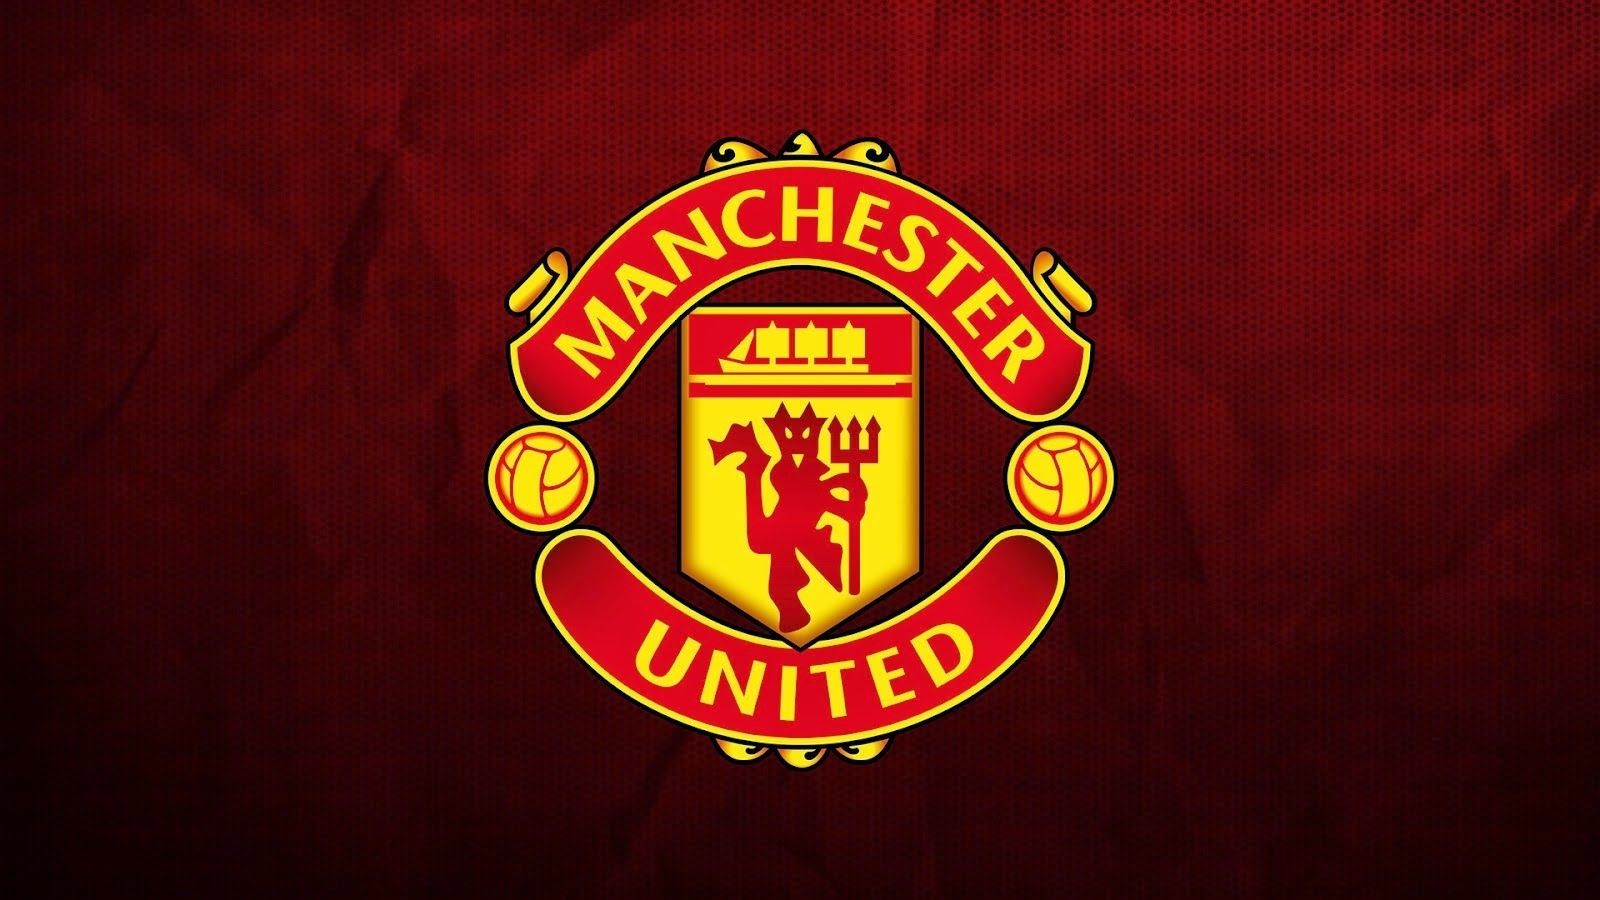 Top Manchester United Wallpaper Full HD For